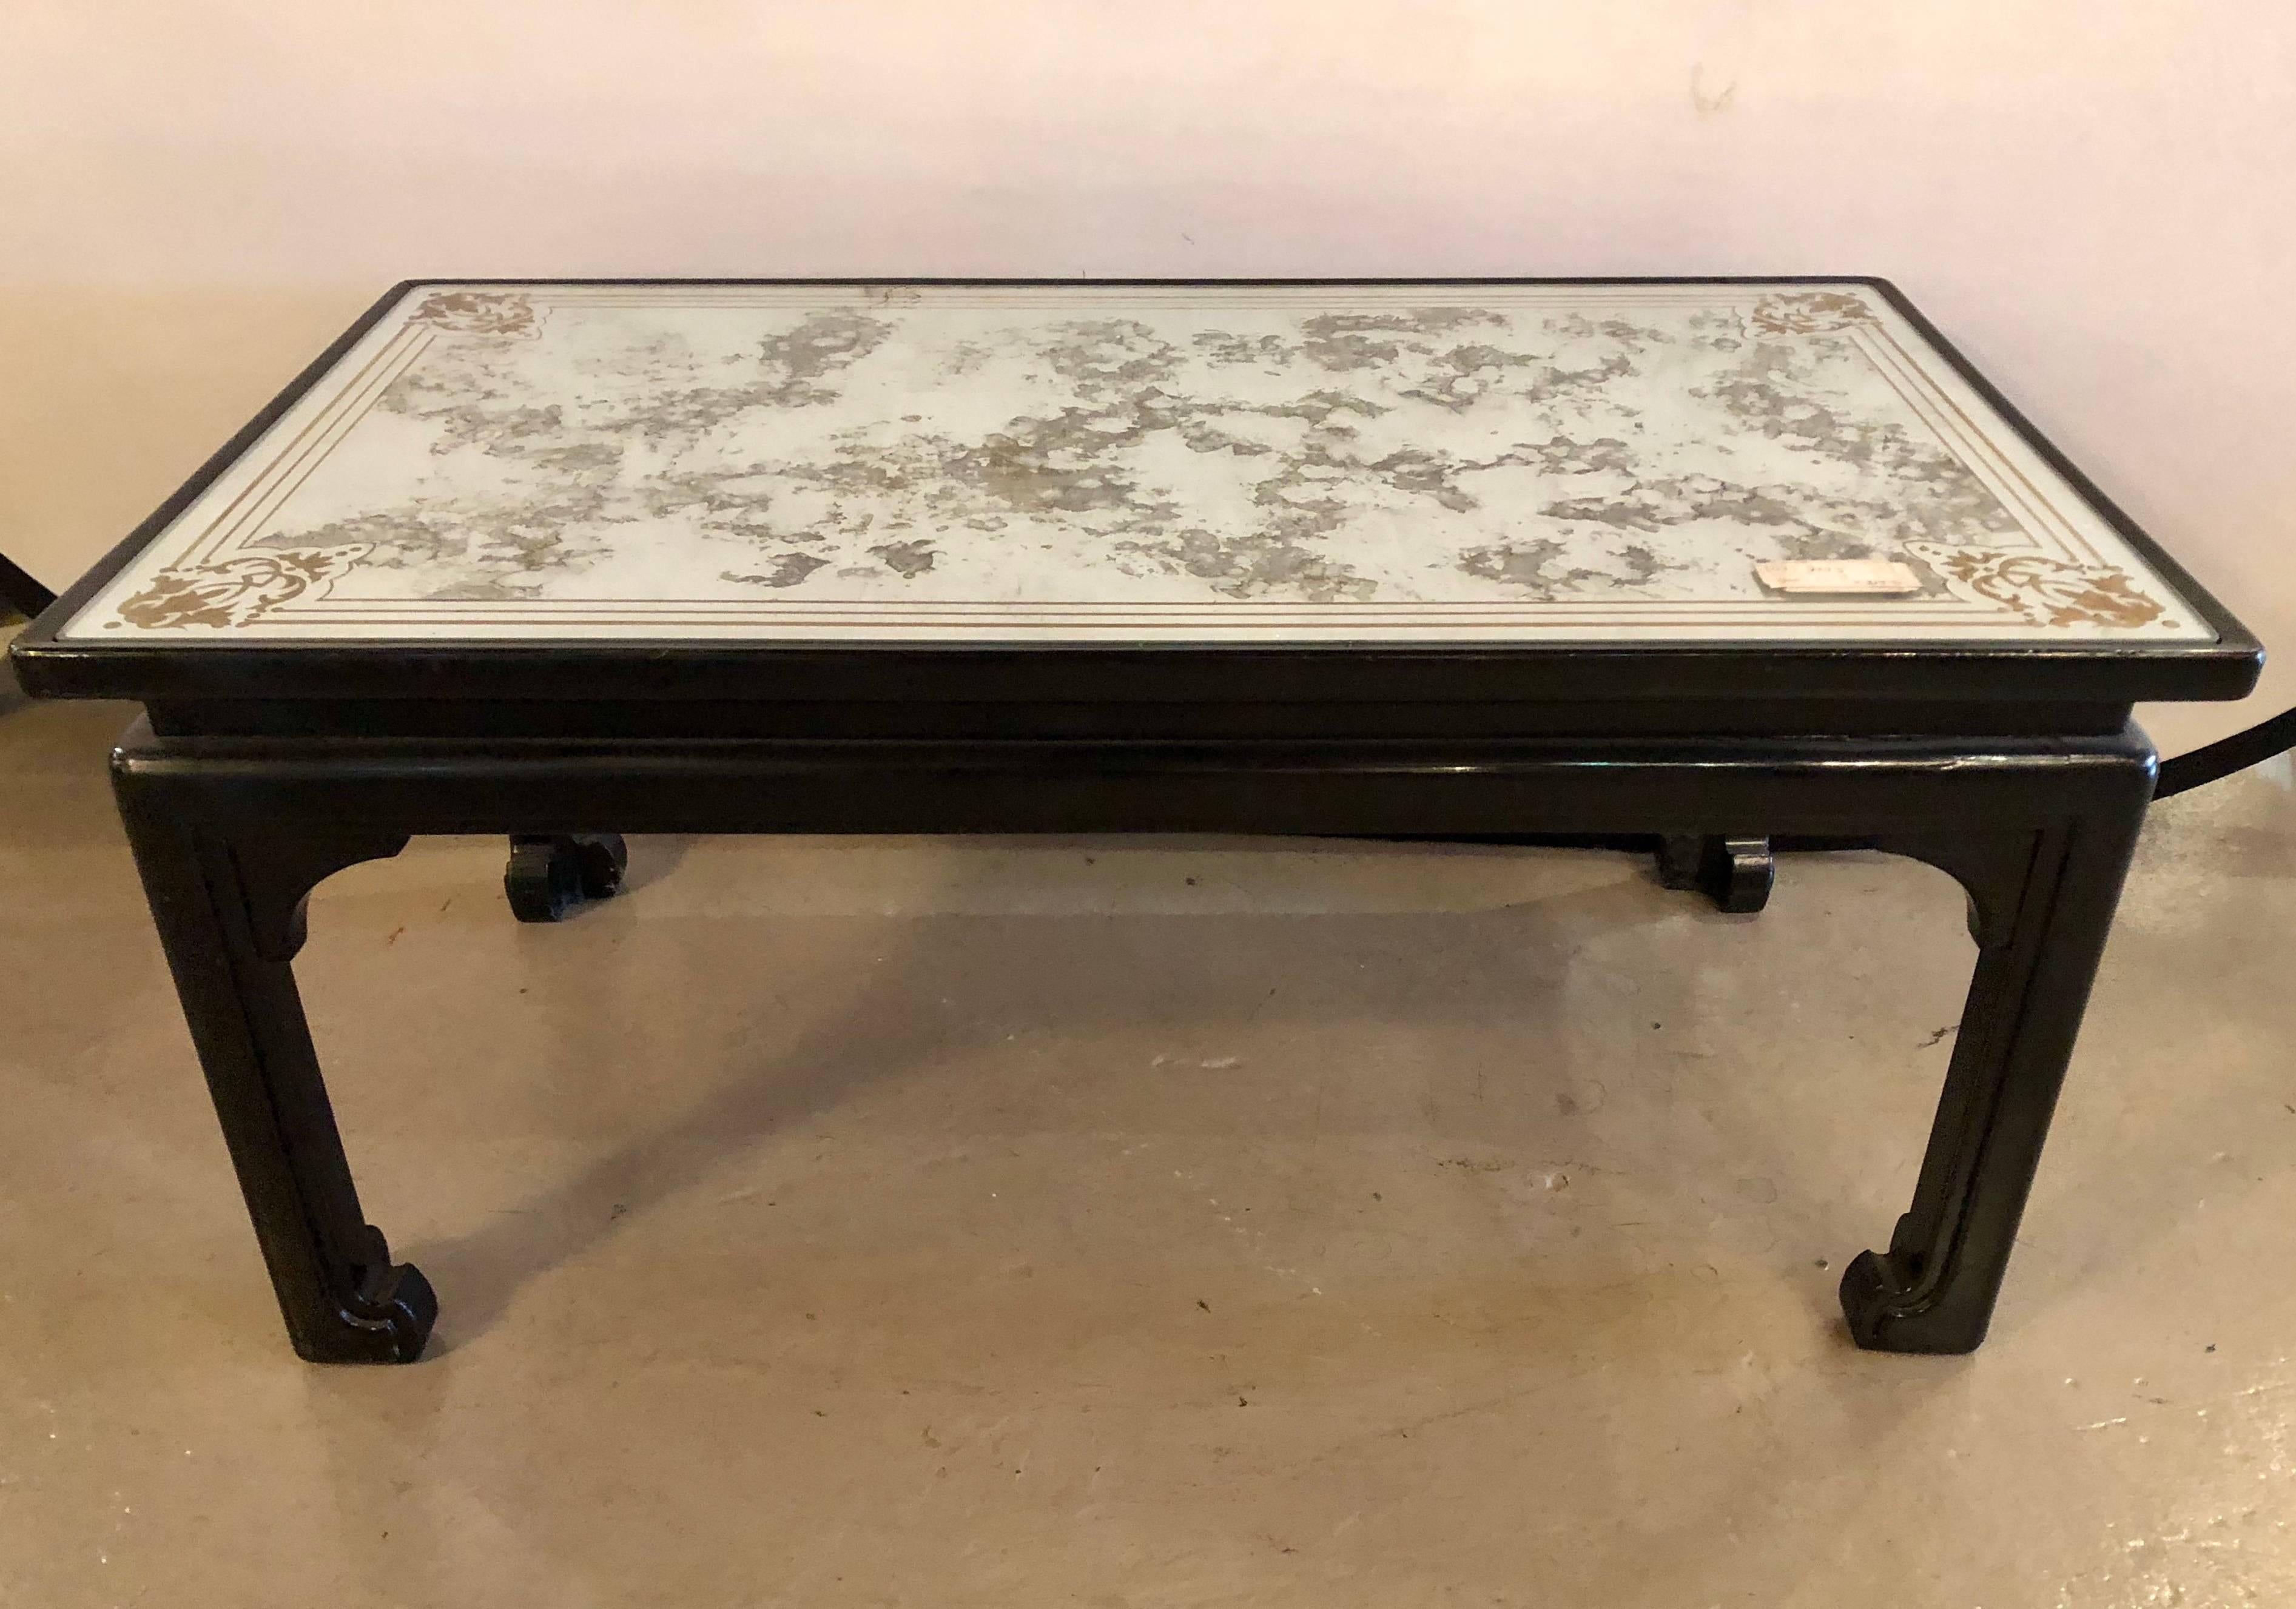 Finely ebonized coffee or cocktail table, in the chinoiserie manner. The rectangular mirrored top having a finely decorated églomisé design inset inspired by Maison Jansen on an Asian inspired base. This table showcases the Hollywood Regency era at